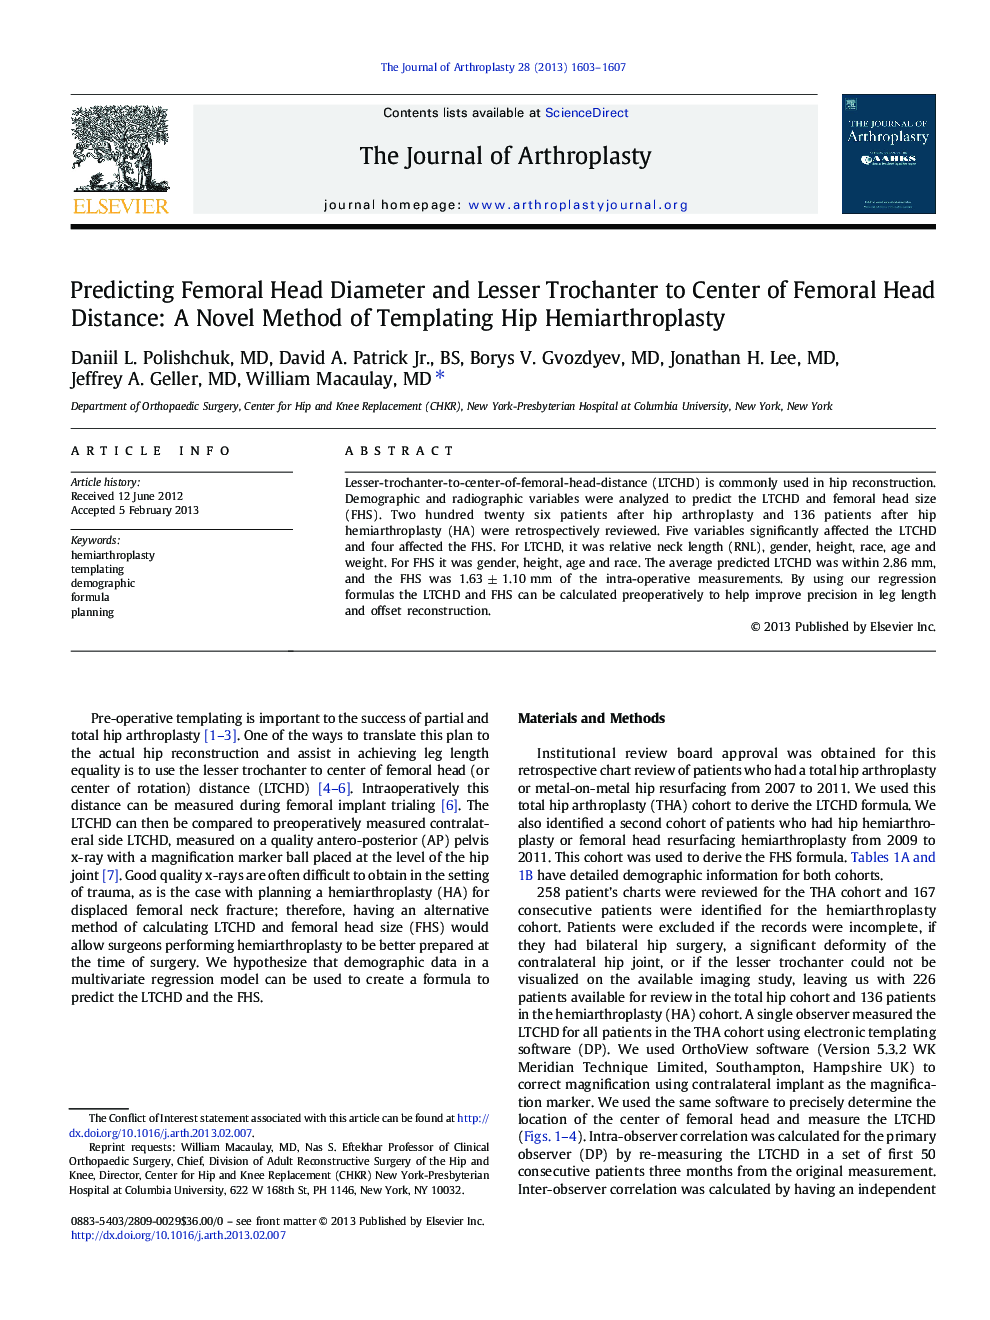 Predicting Femoral Head Diameter and Lesser Trochanter to Center of Femoral Head Distance: A Novel Method of Templating Hip Hemiarthroplasty 